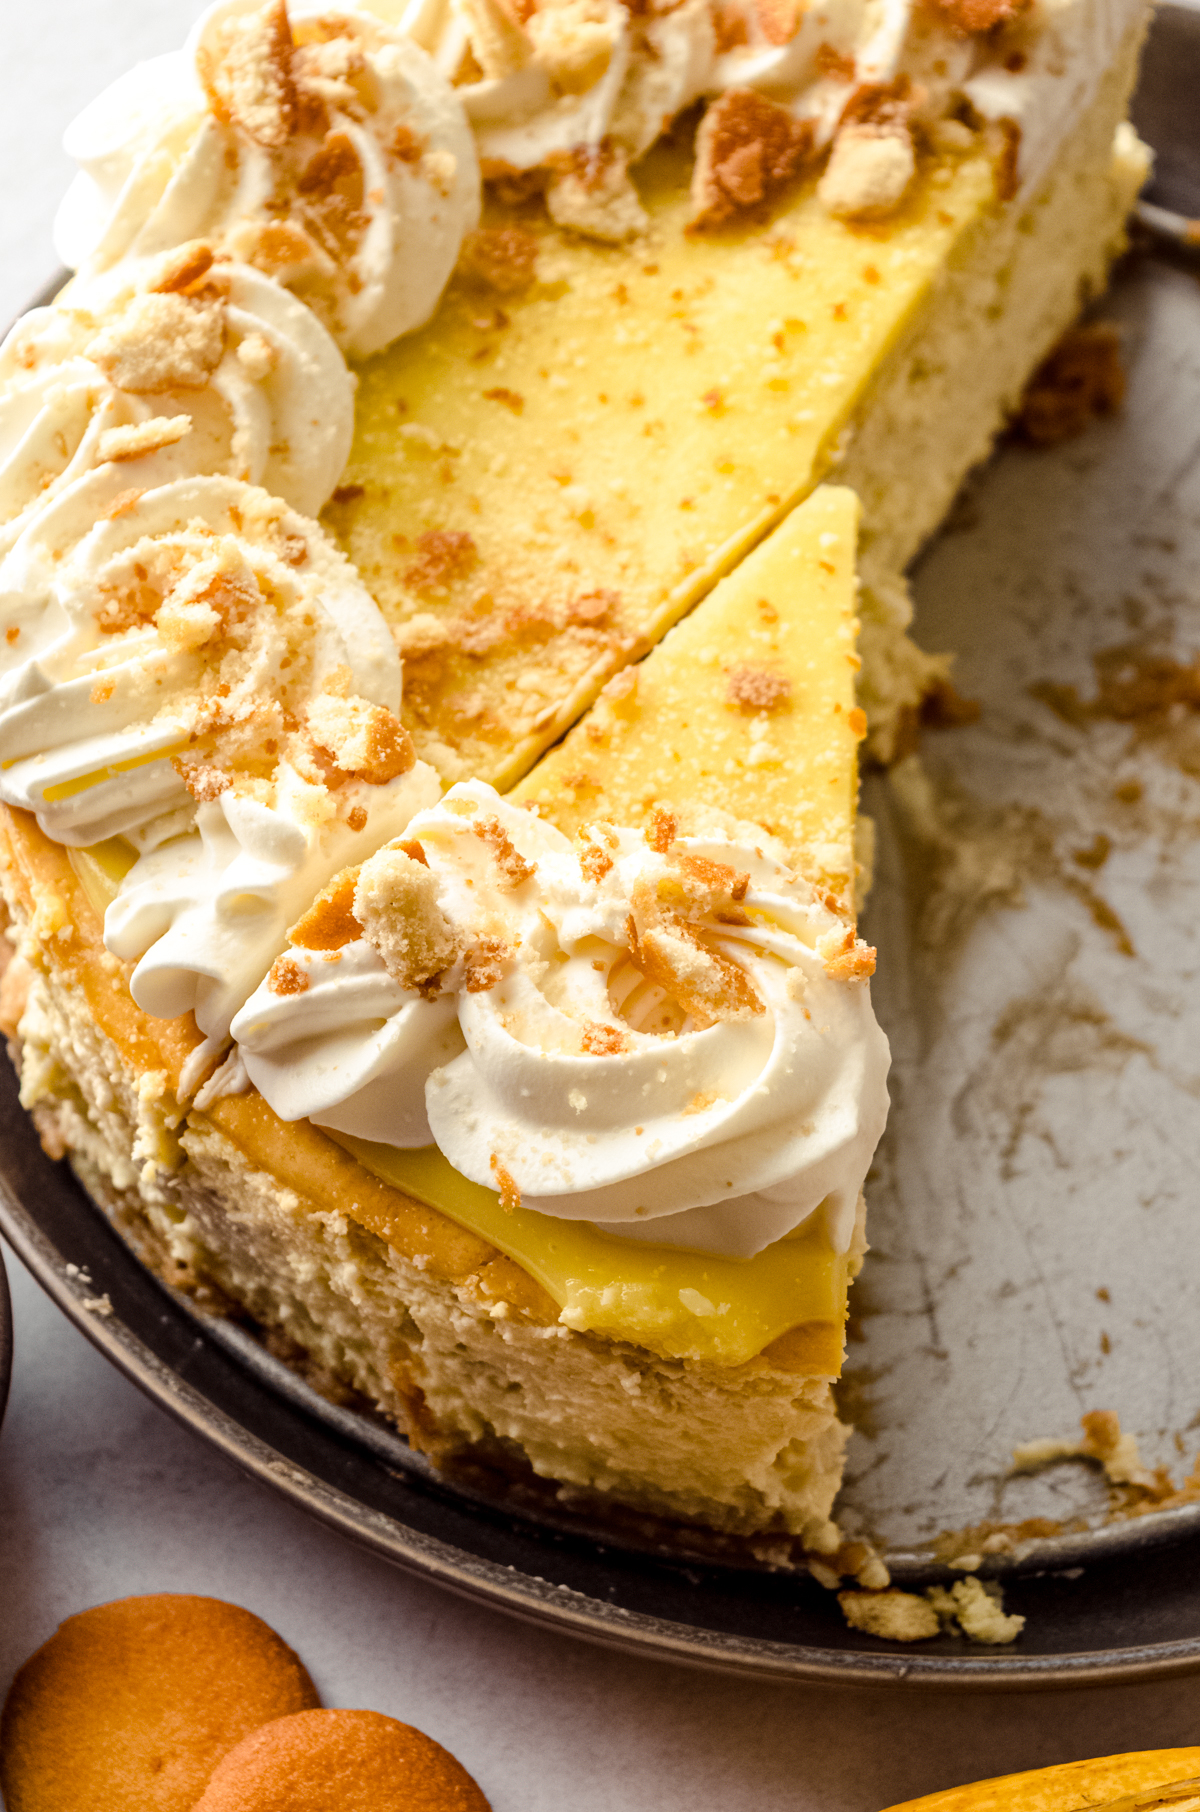 A banana pudding cheesecake on a platter that has been sliced into pieces.